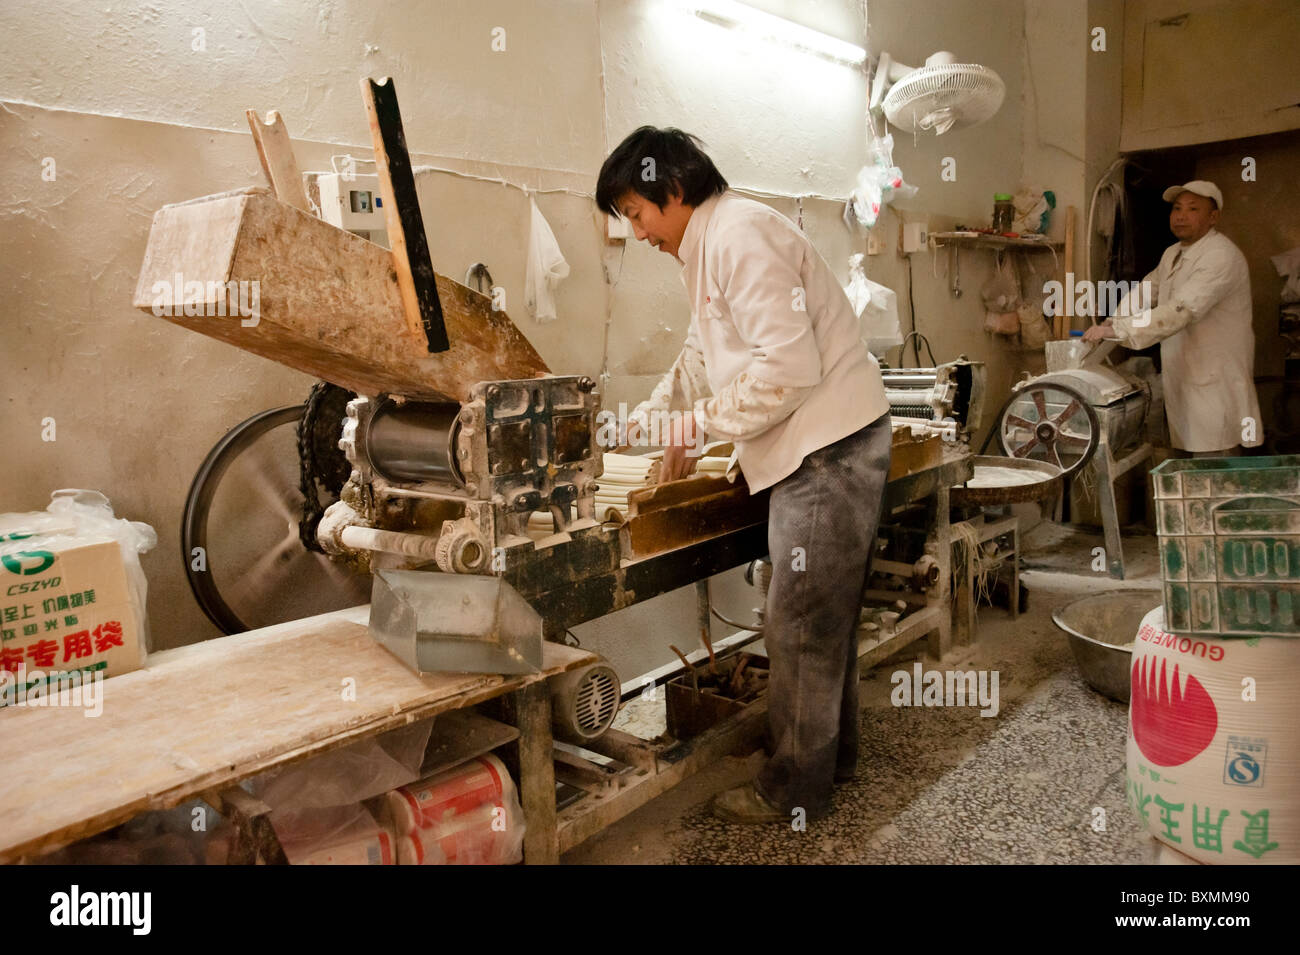 Unidentified man working in a factory using a machinery to make noodles in Chongqing, Dec 21, 2010. Stock Photo